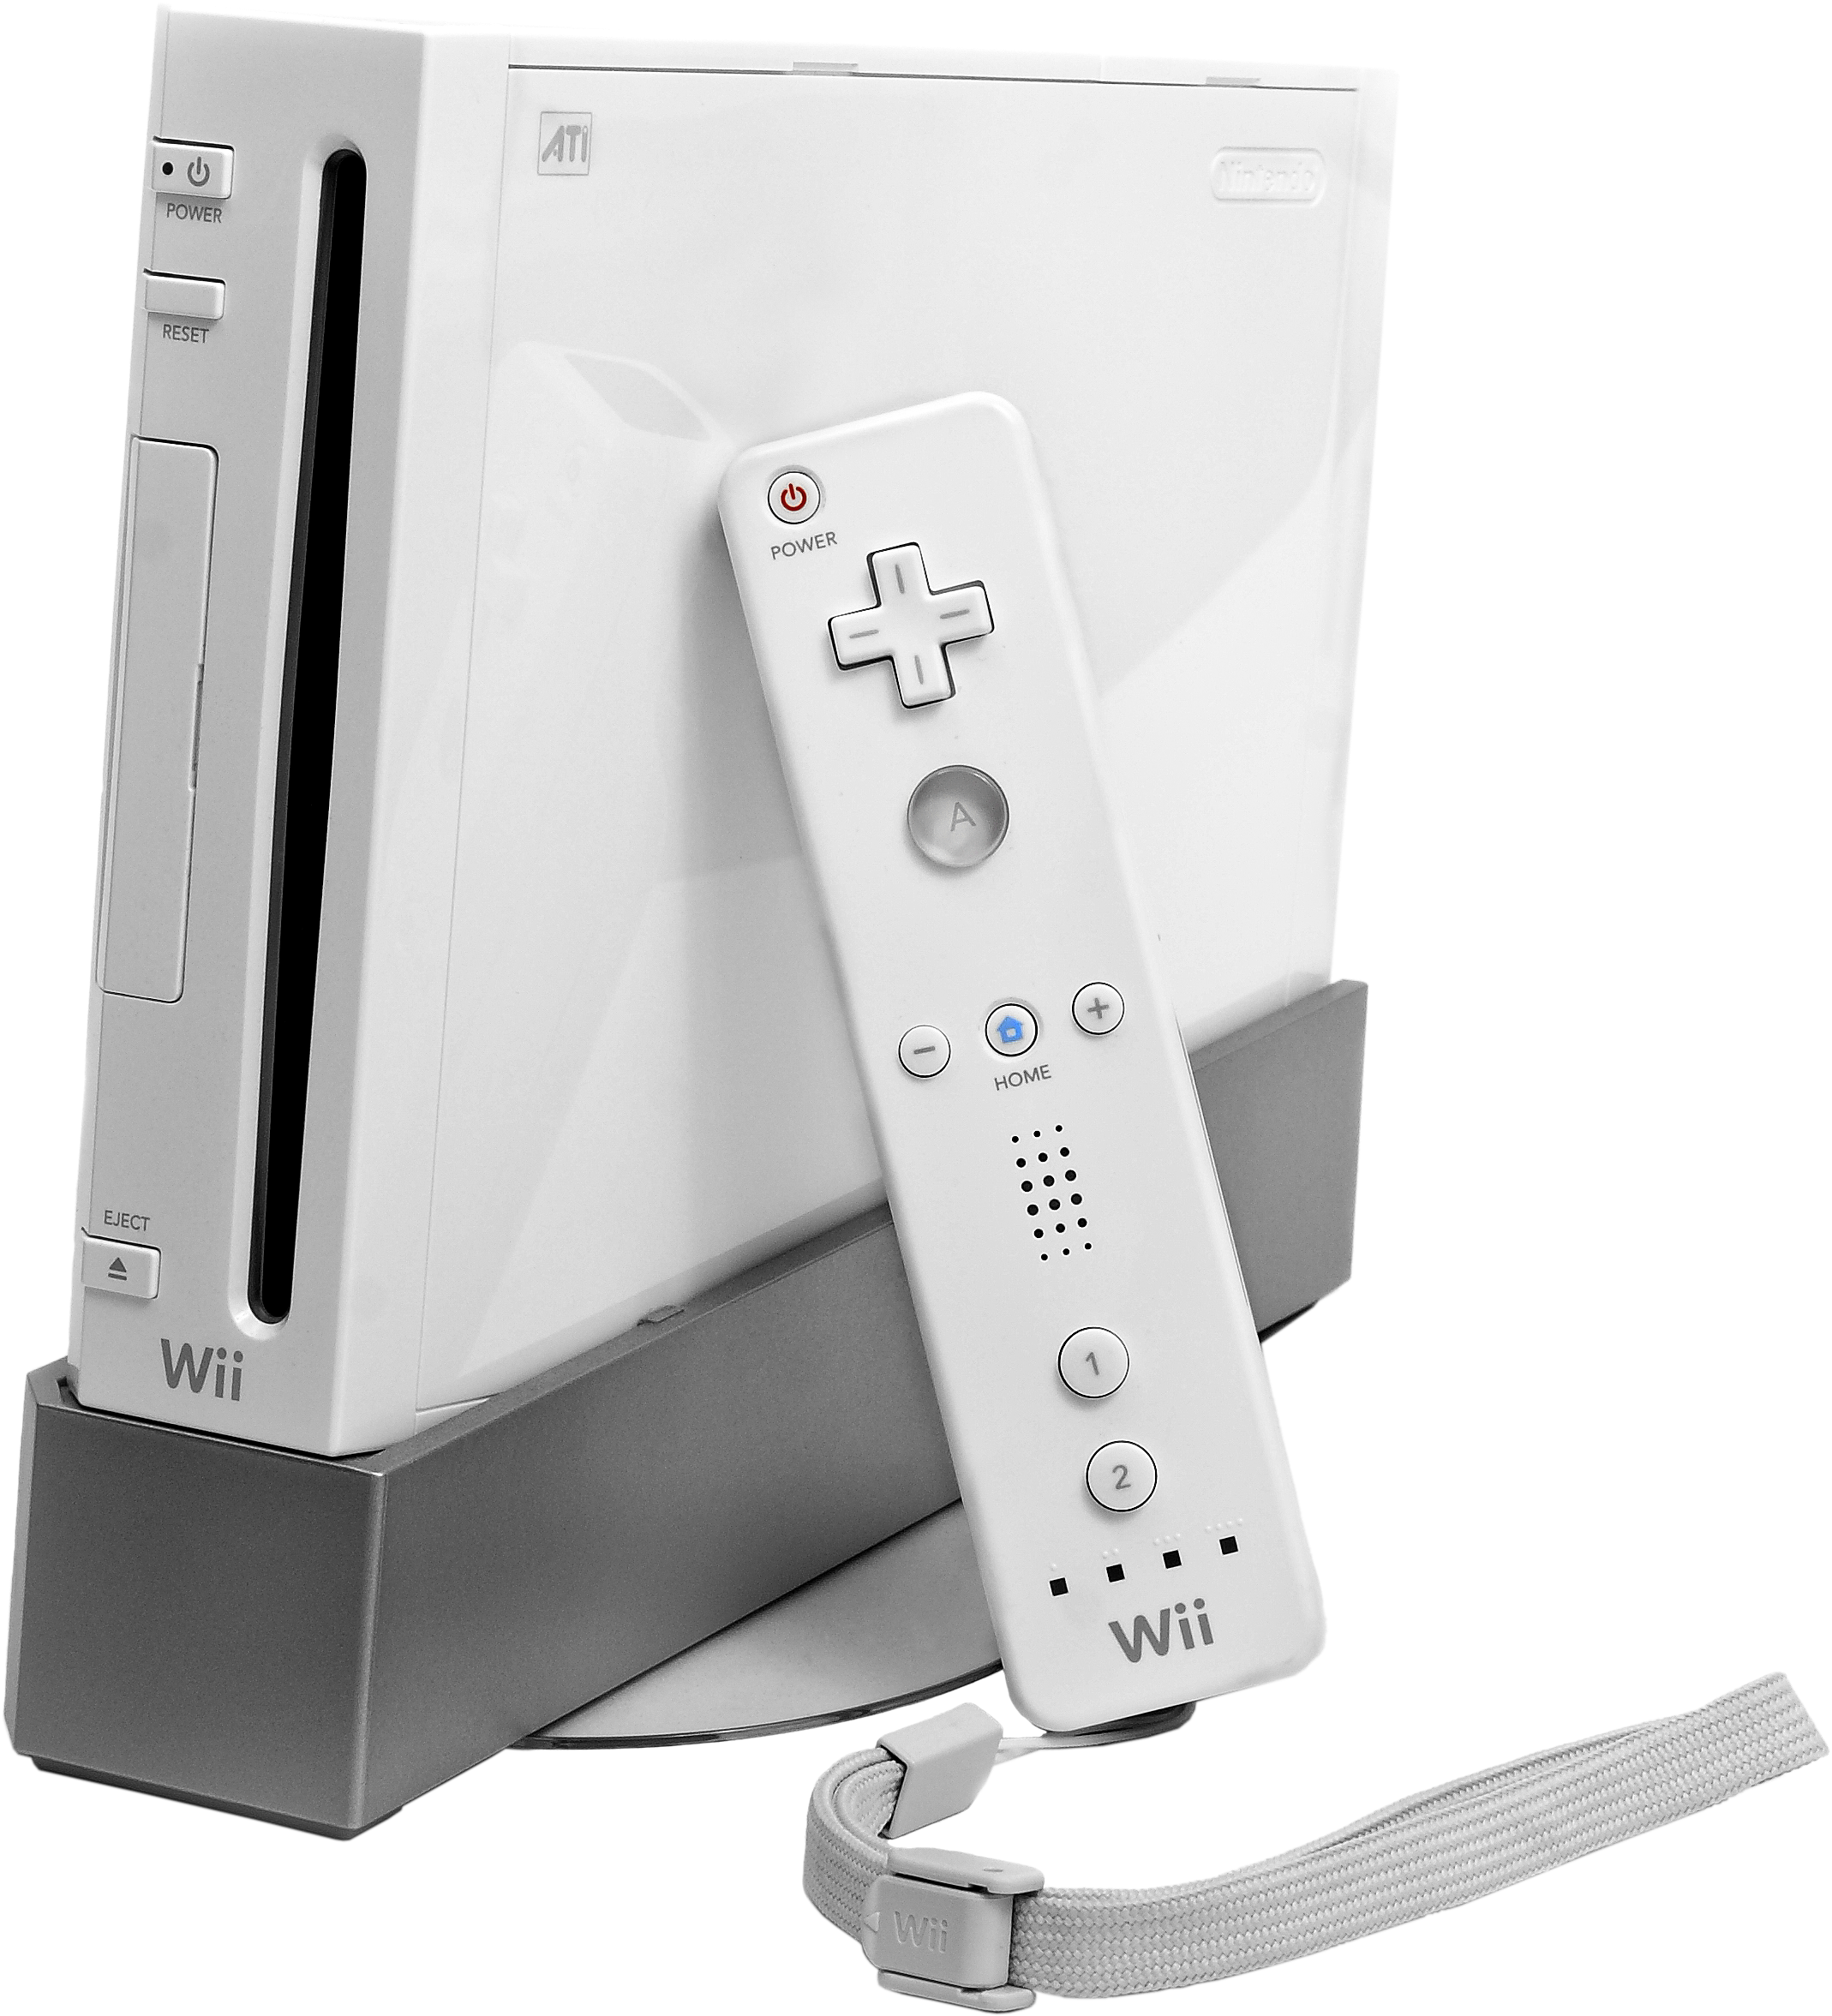 A White Video Game Console With A Remote Control